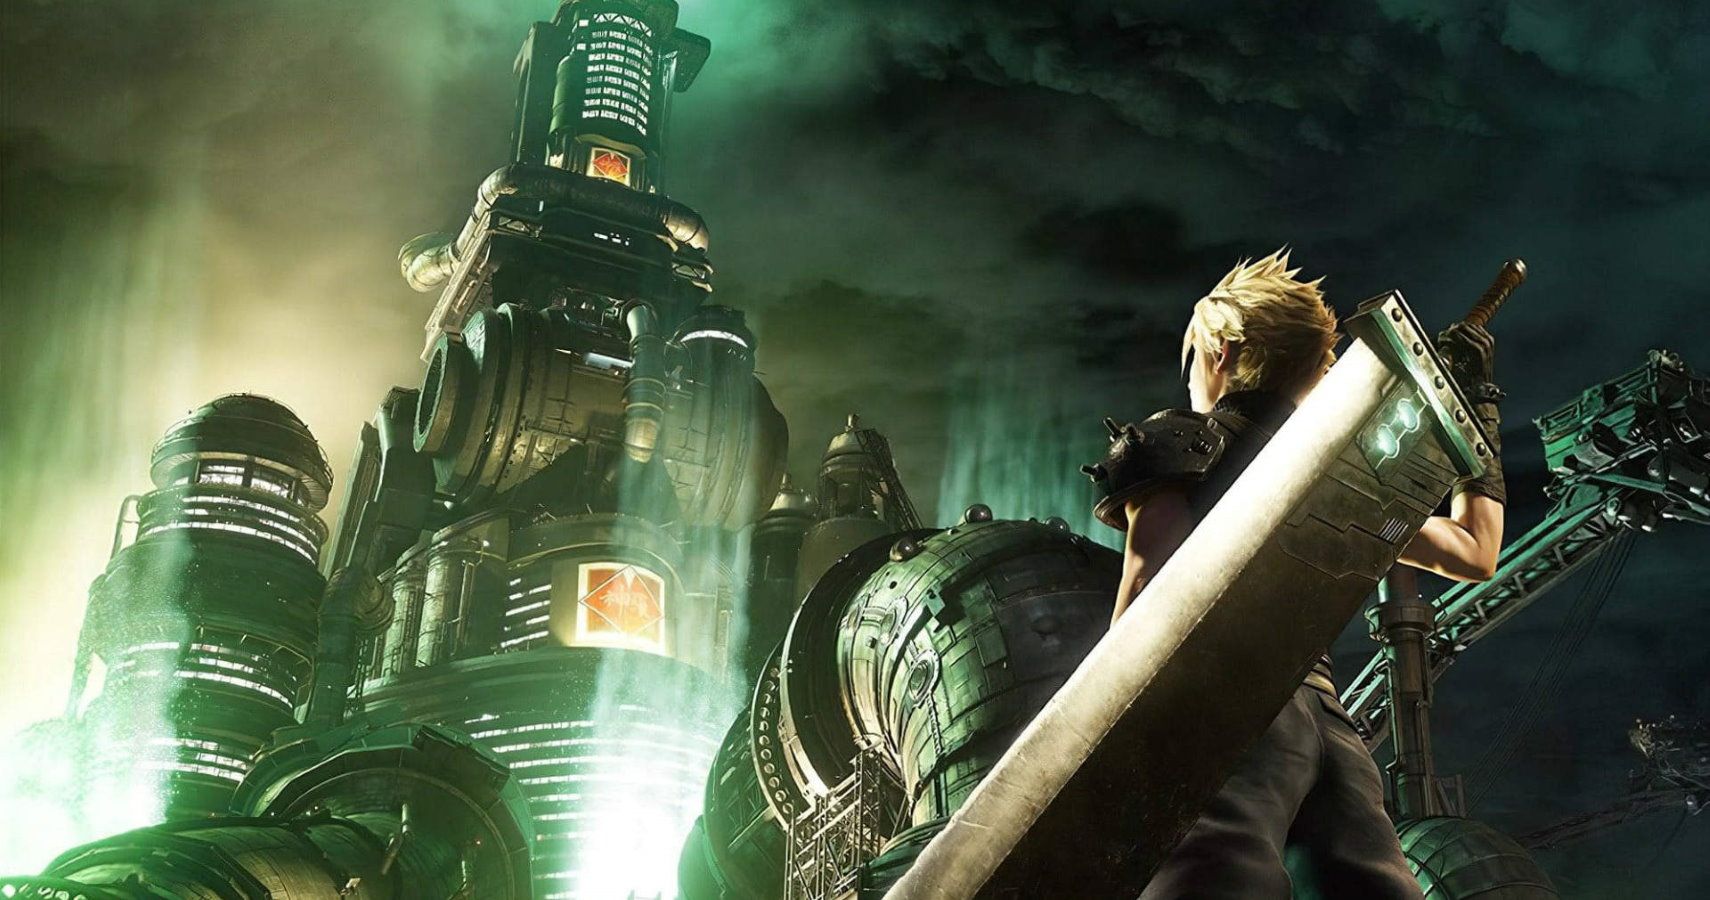 Part 2 Of Final Fantasy 7 Remake Has Been Impacted By COVID19 As Square Enix Moves To Remote Work